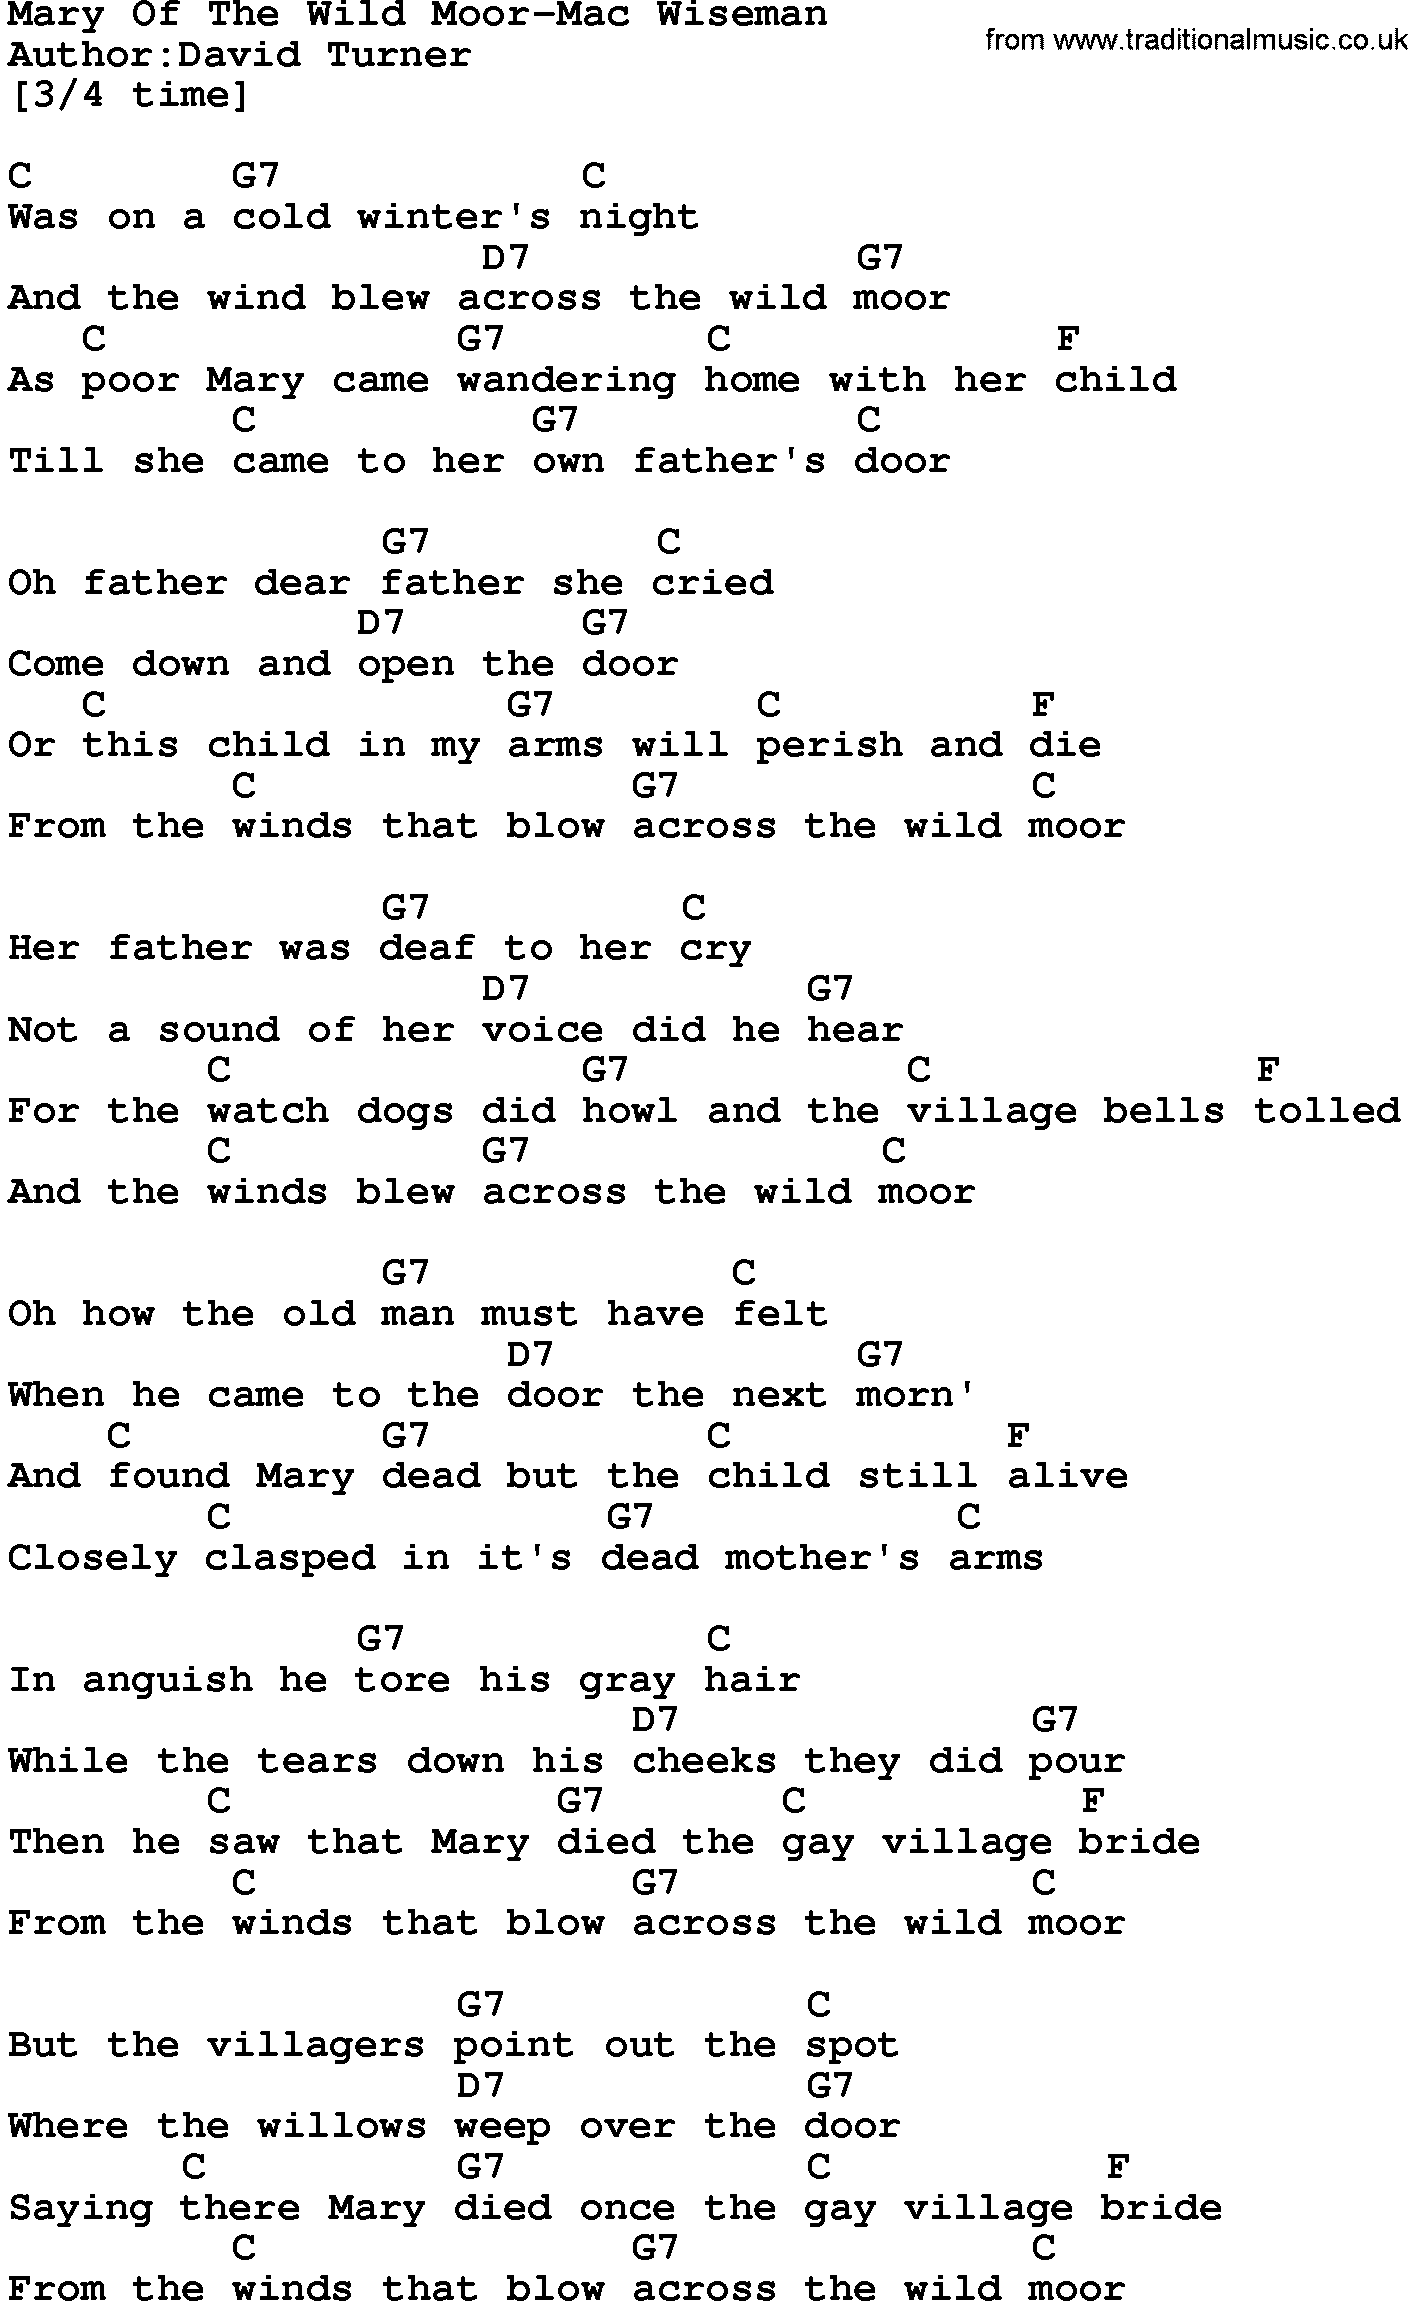 Country music song: Mary Of The Wild Moor-Mac Wiseman lyrics and chords